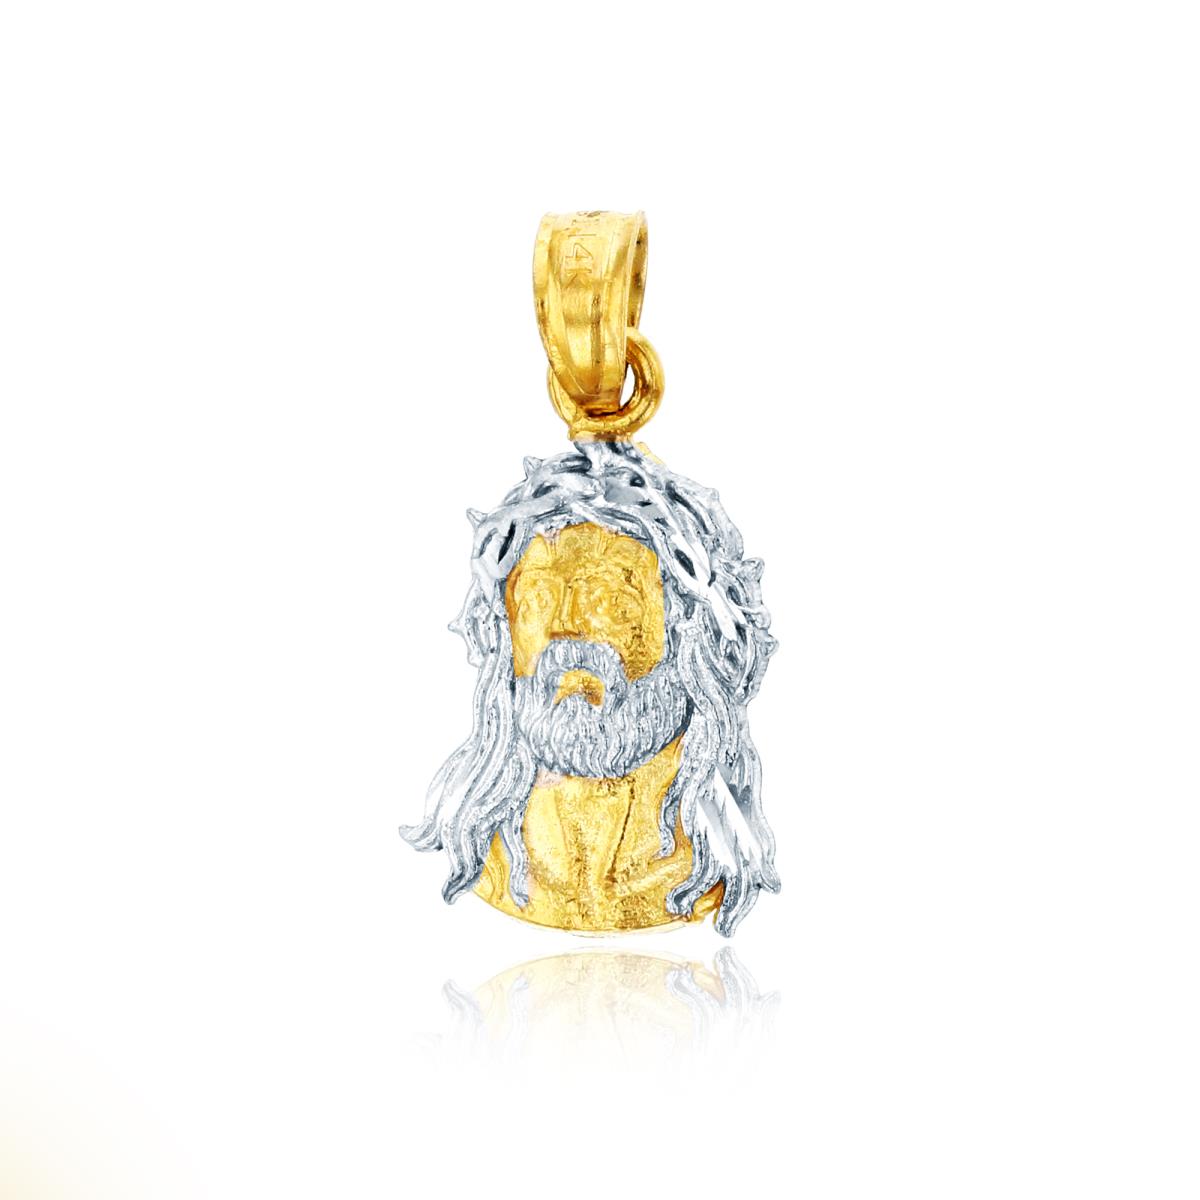 10K Yellow & White Gold Religious Figure Bust Dangling Pendant